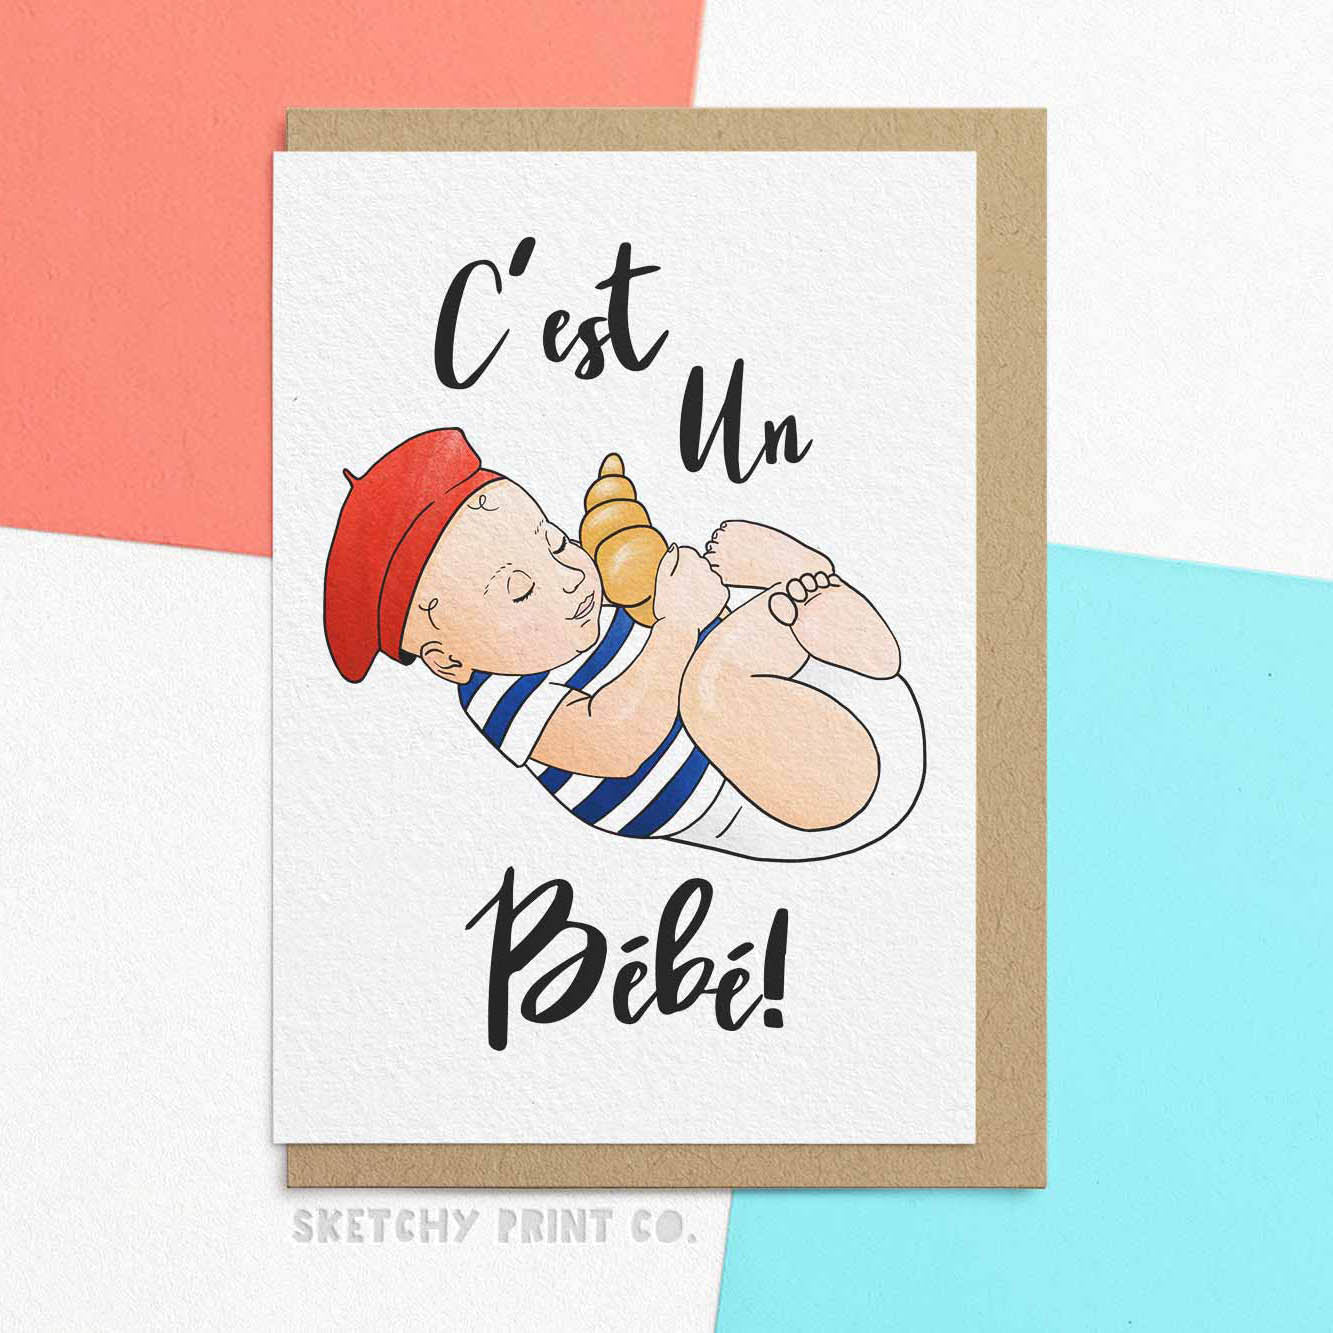 Funny New Baby Card reading "C'est Un Baby!"  French for "It's A Baby!" for Mum and Dad. Keywords: unique gift unusual hilarious illustrated sketchy print co